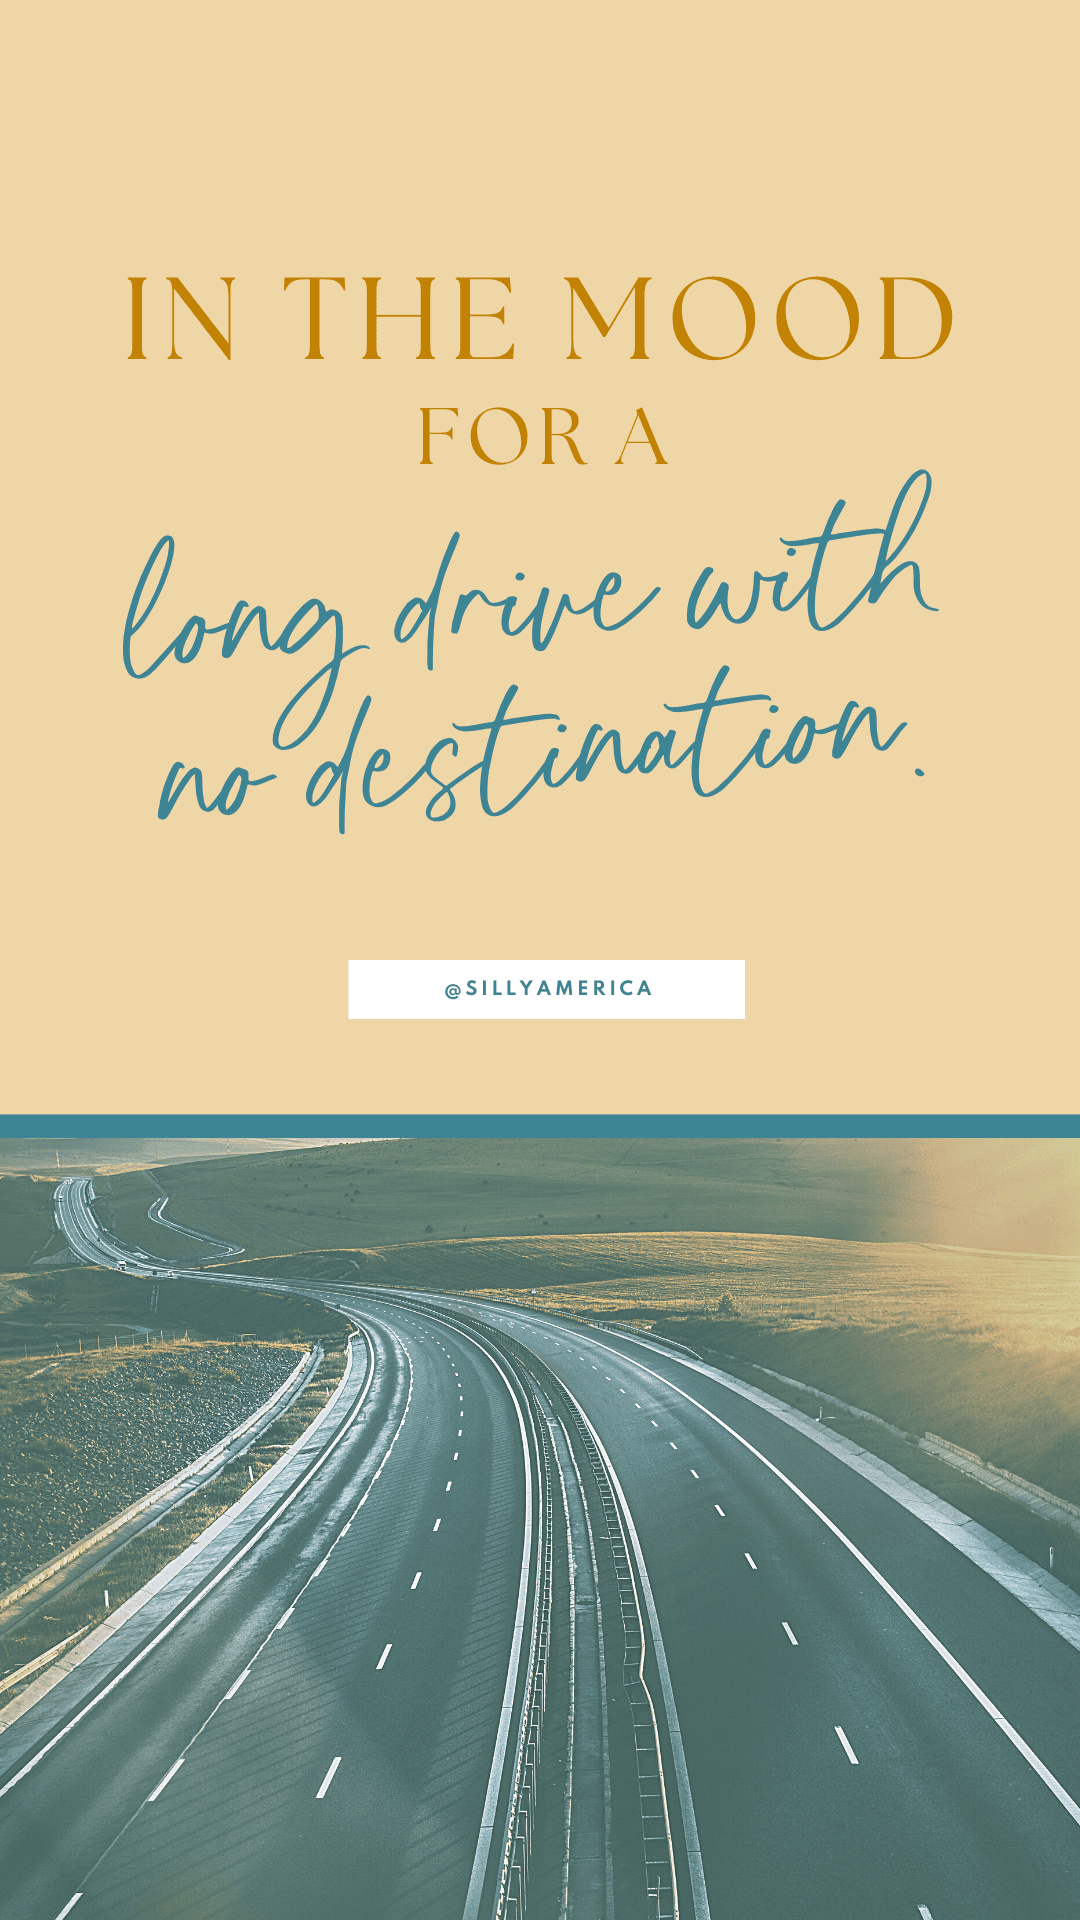 In the mood for a long drive with no destination.